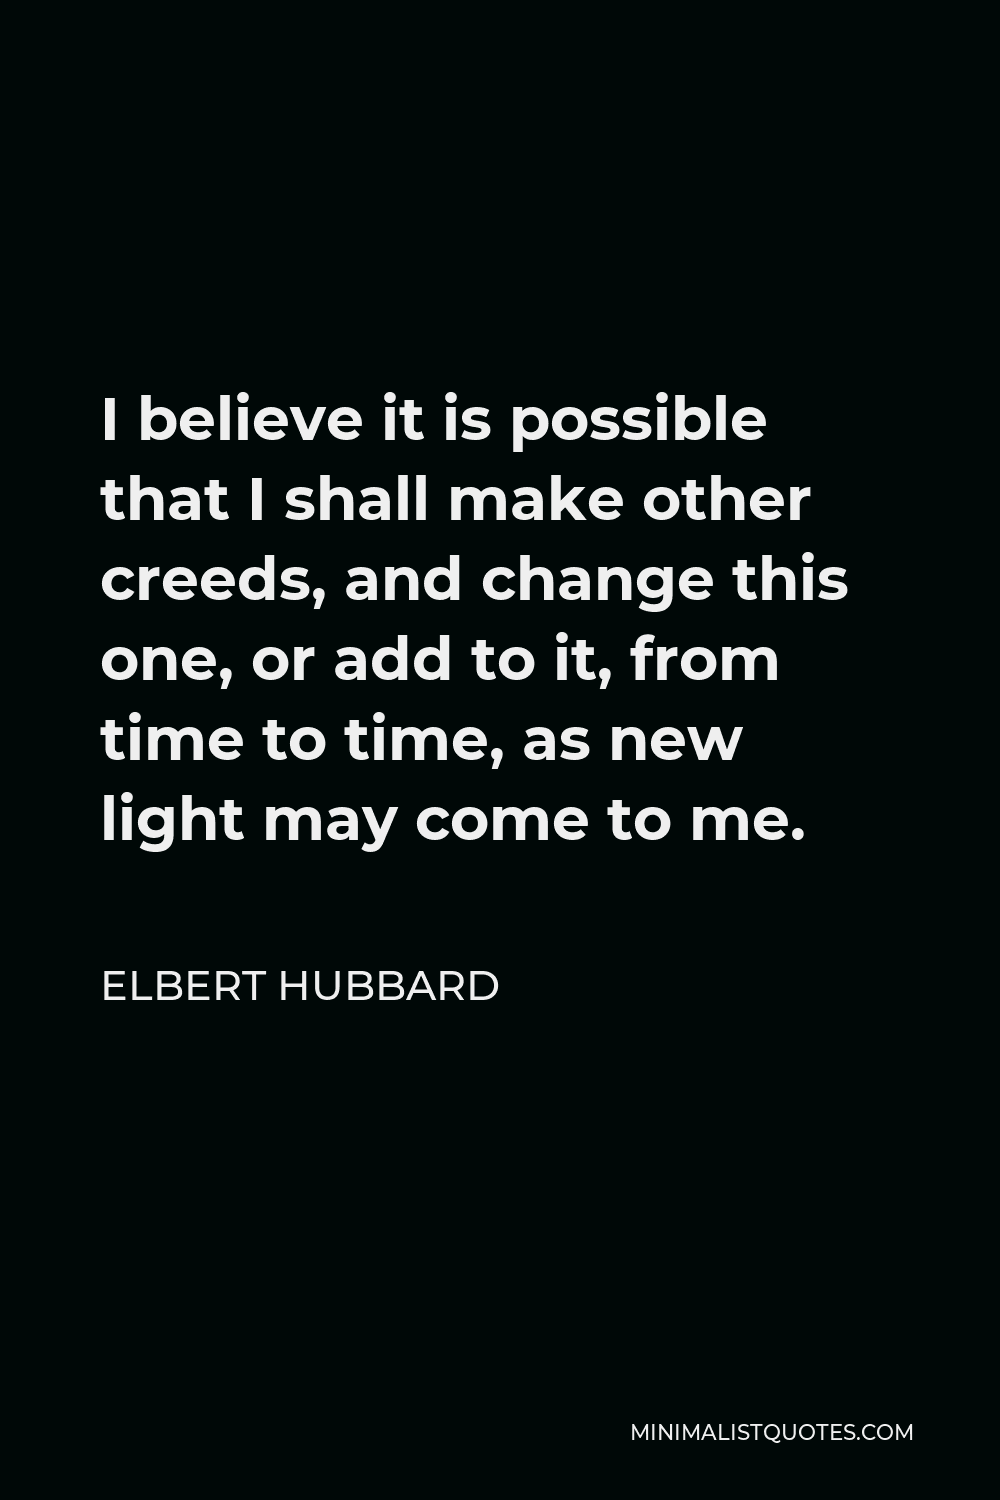 Elbert Hubbard Quote - I believe it is possible that I shall make other creeds, and change this one, or add to it, from time to time, as new light may come to me.